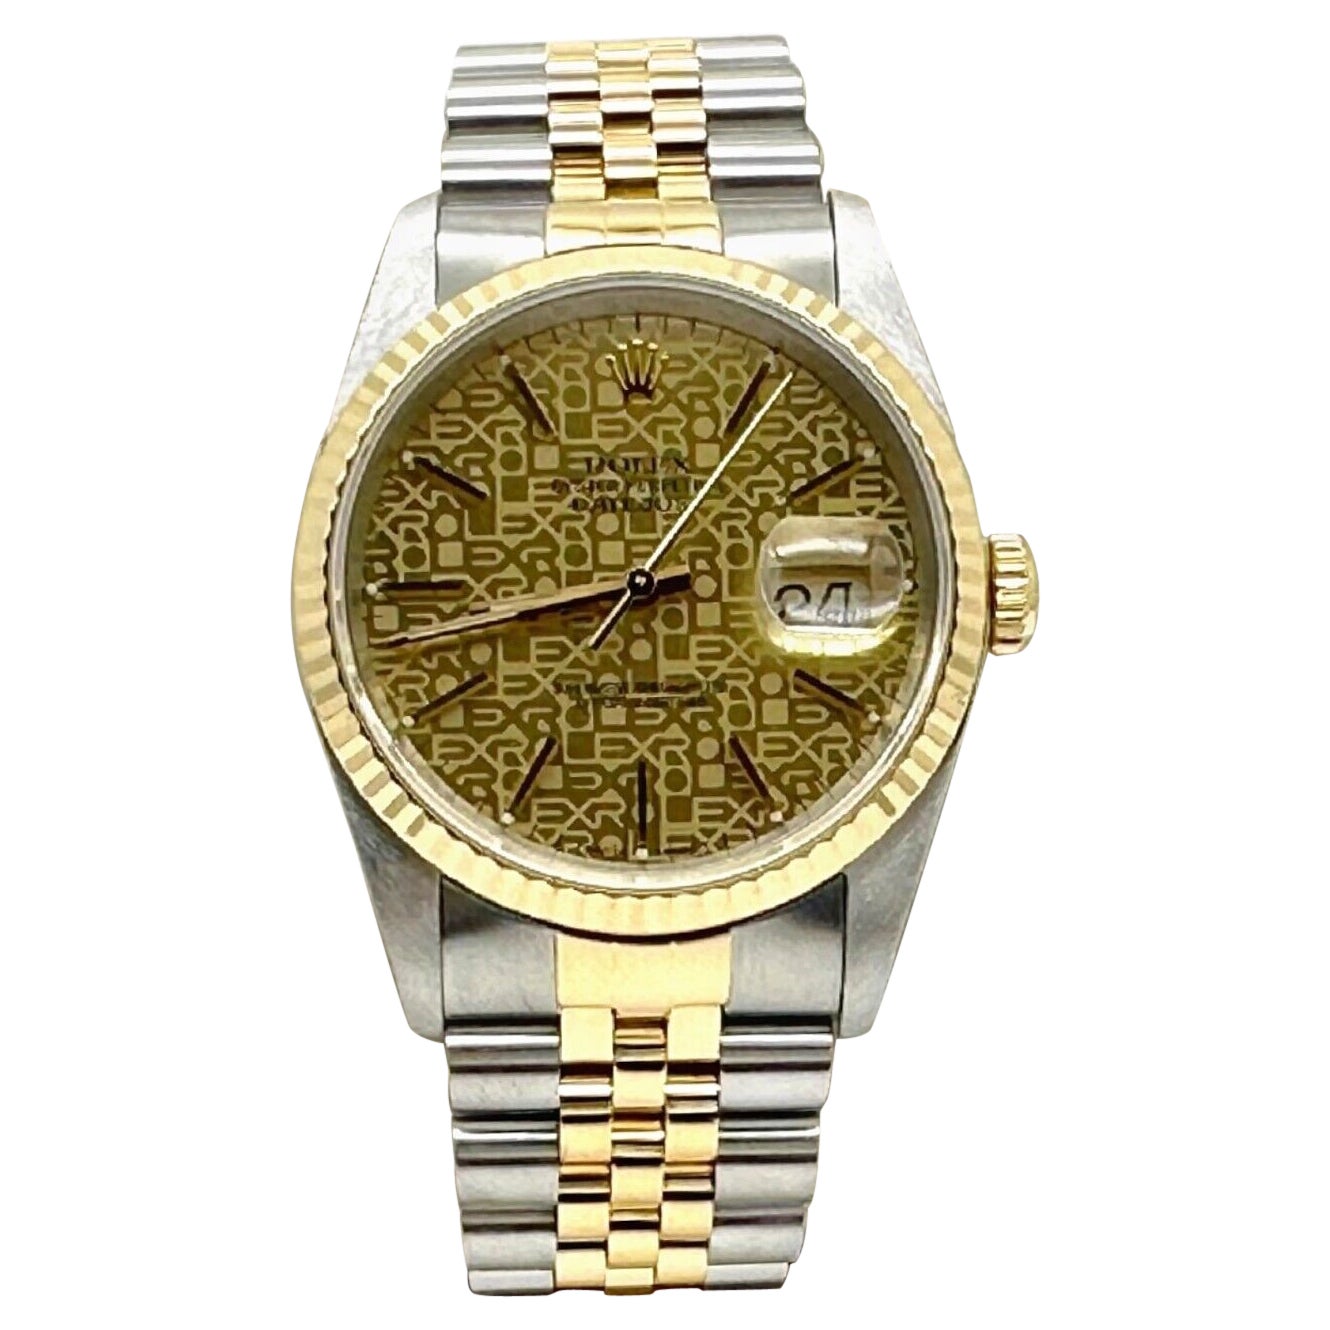 Rolex Datejust 16233 Jubilee Dial 18K Yellow Gold Stainless Steel For Sale